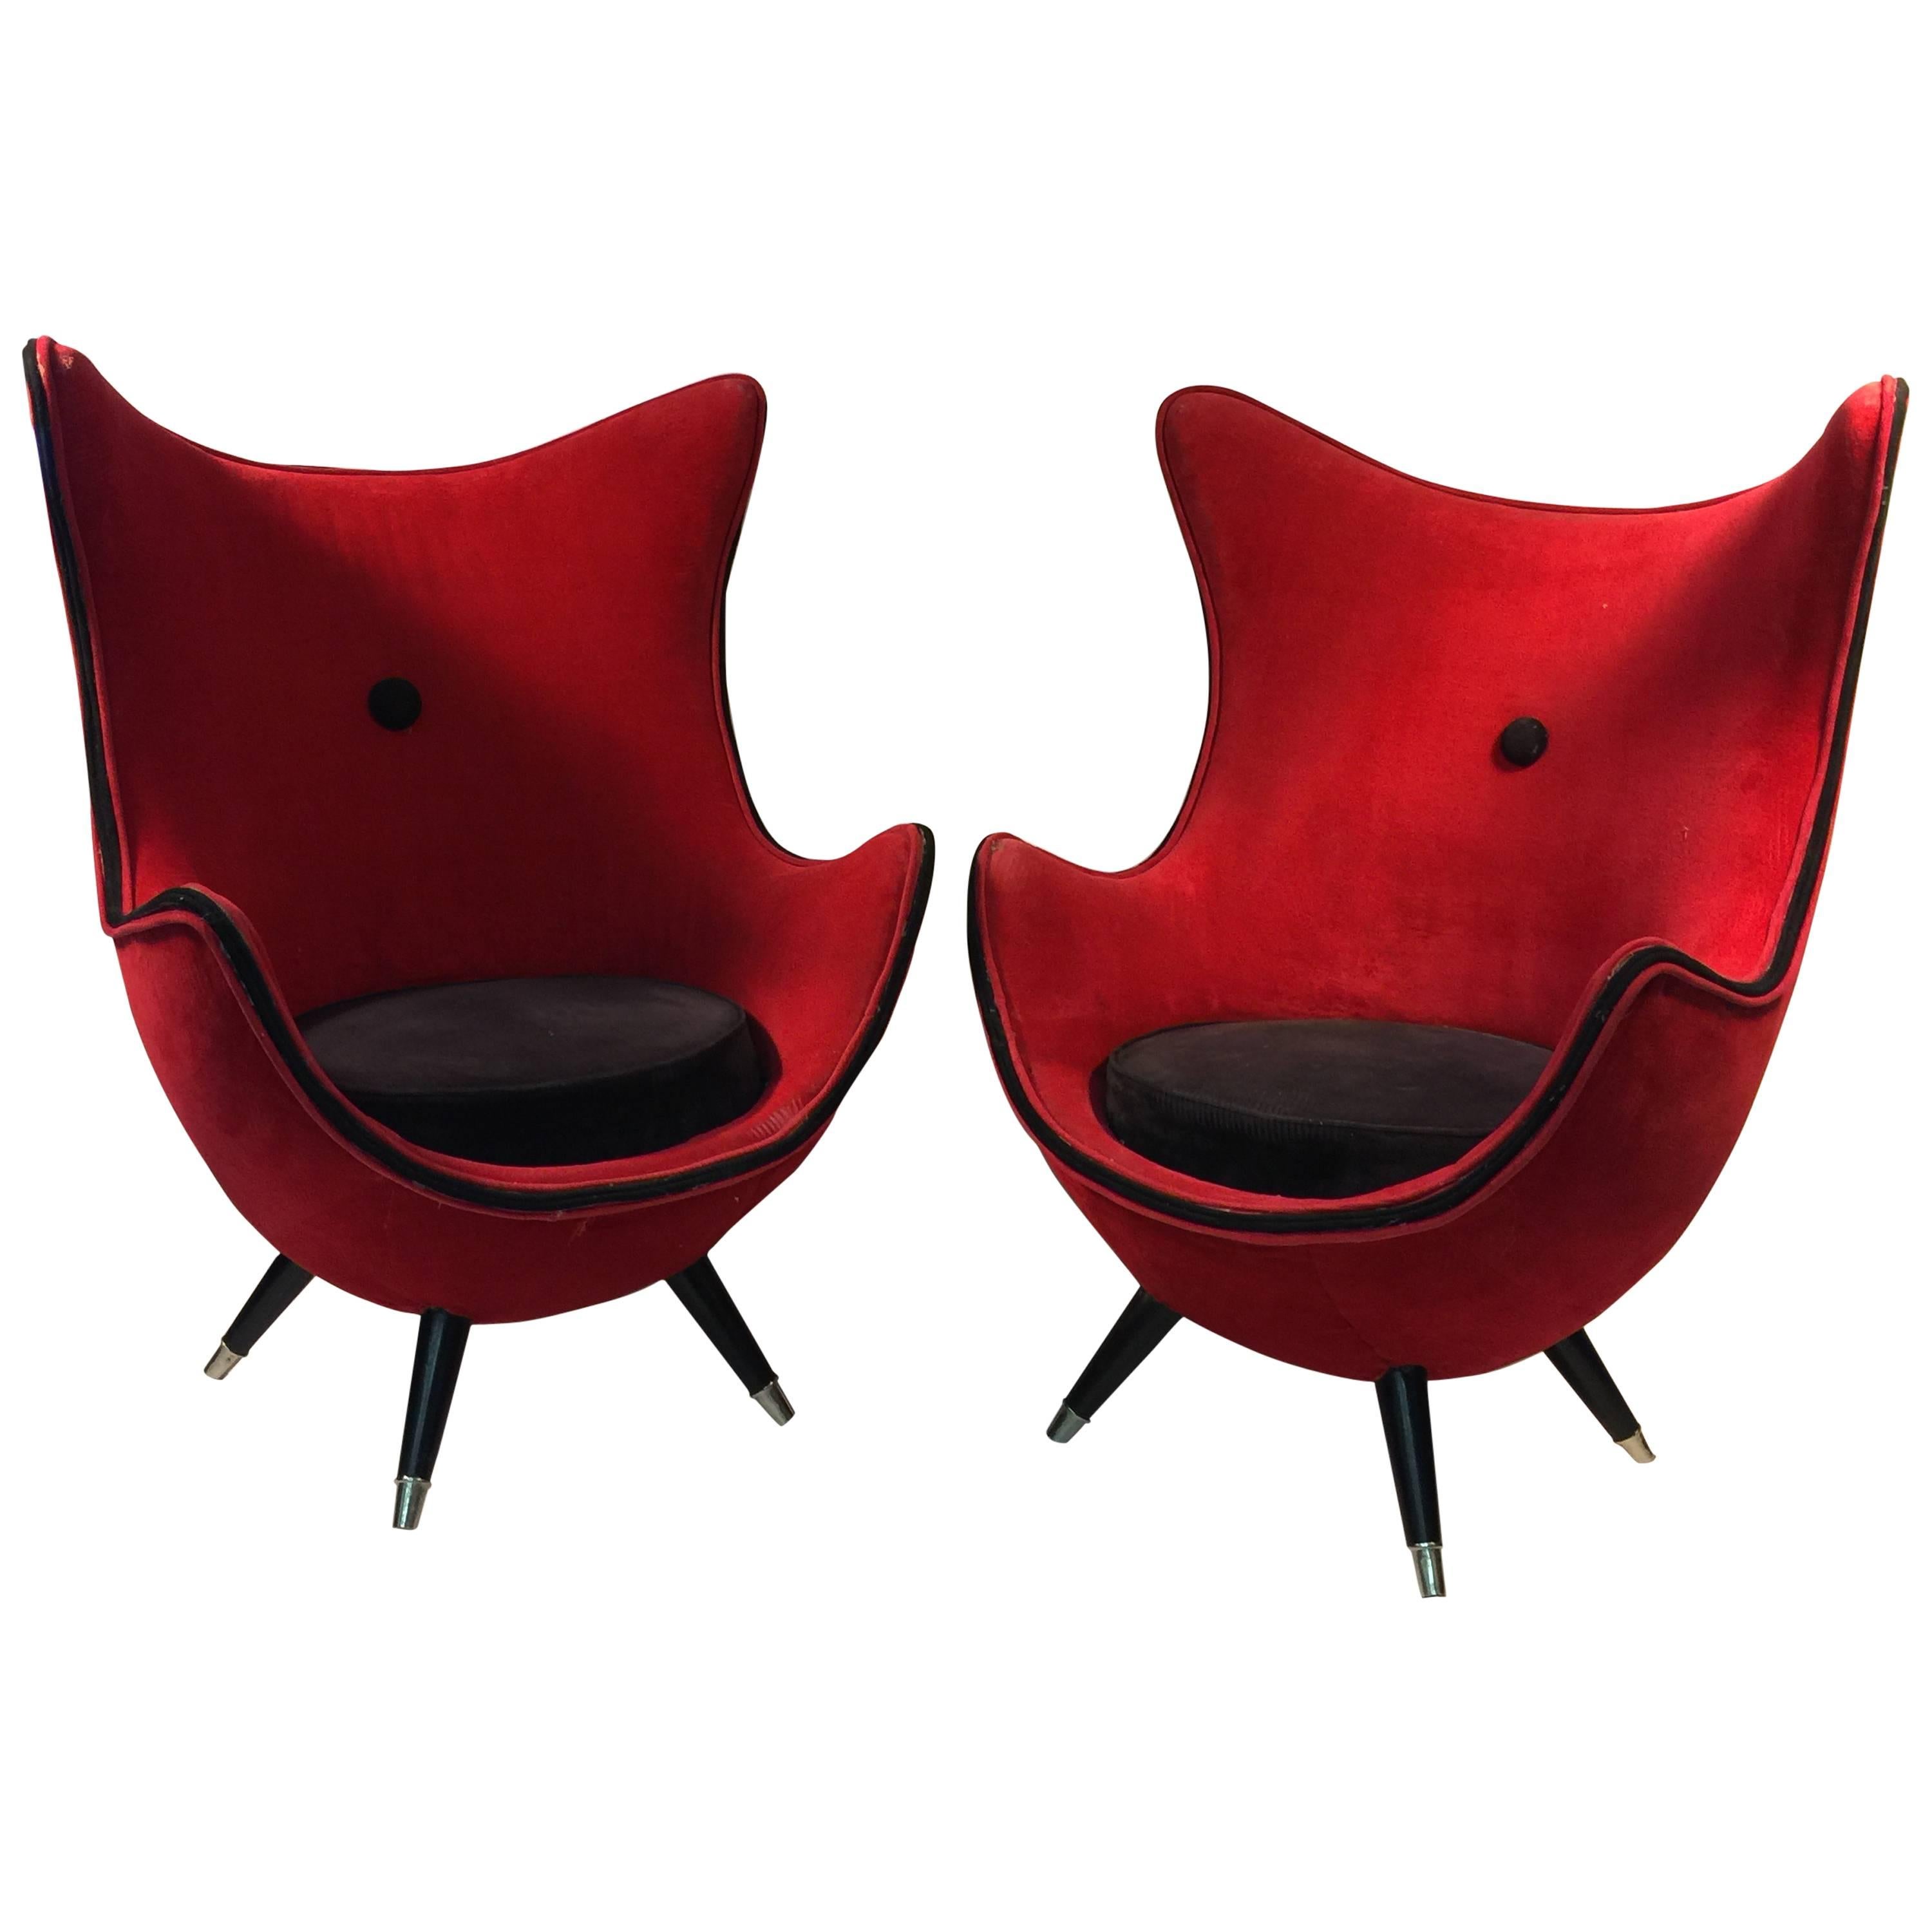  Exceptional Pair of Modernist Red/Black Lounge Chairs Atrributed to Jean Royere For Sale